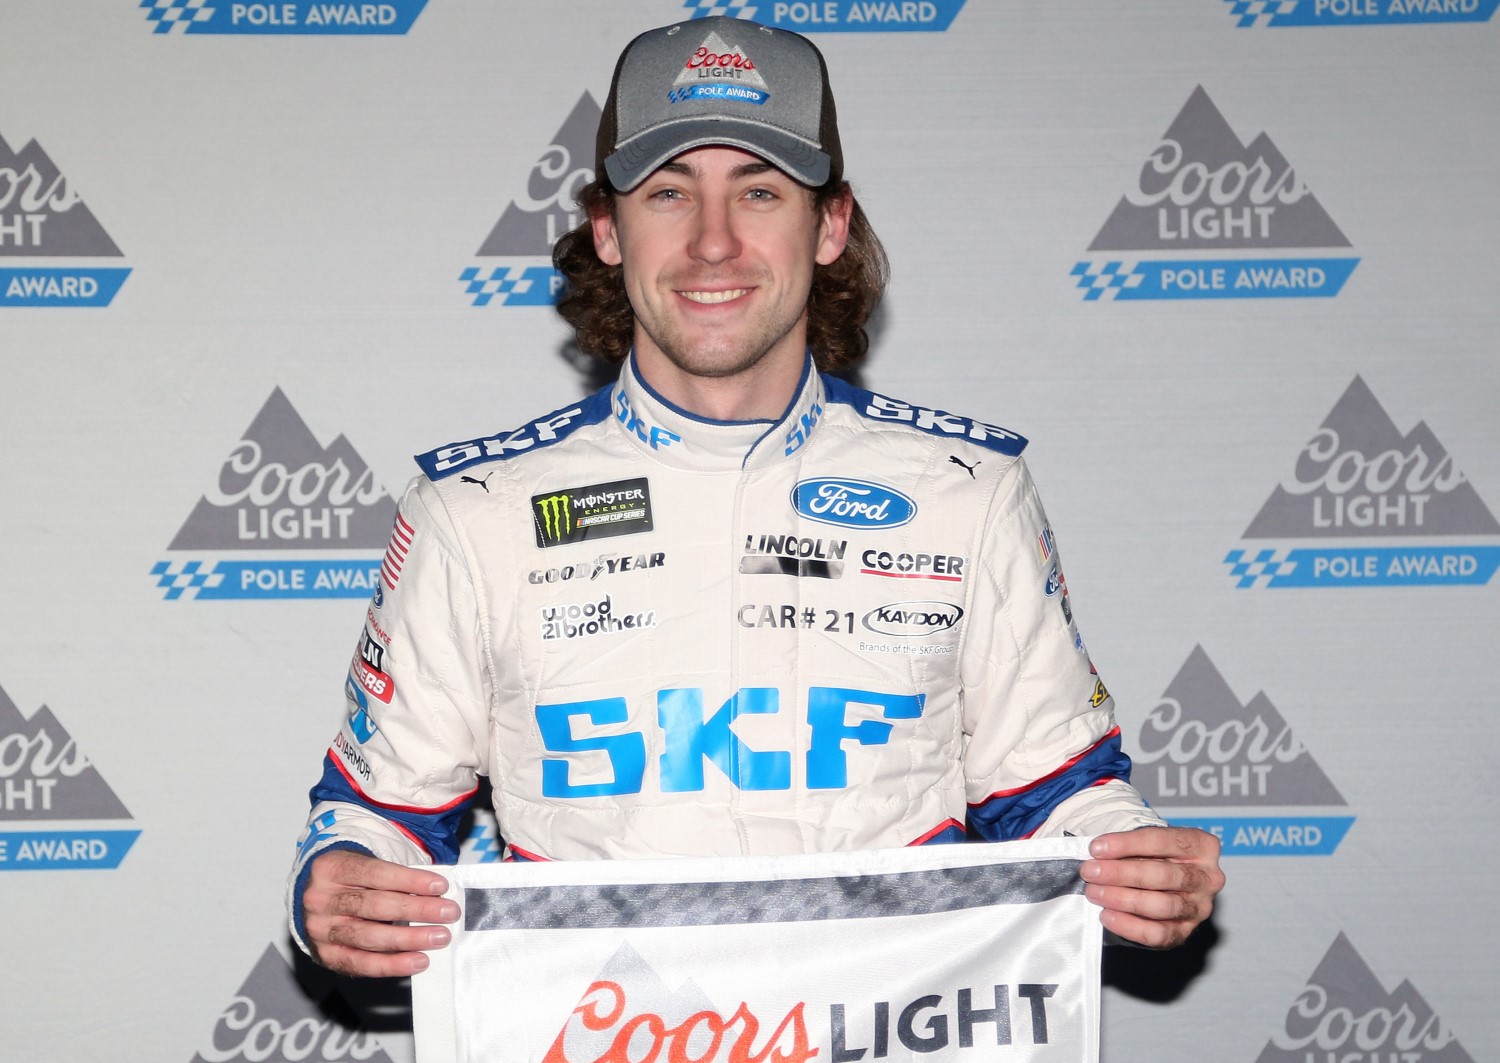 The Coors Light Pole award is back